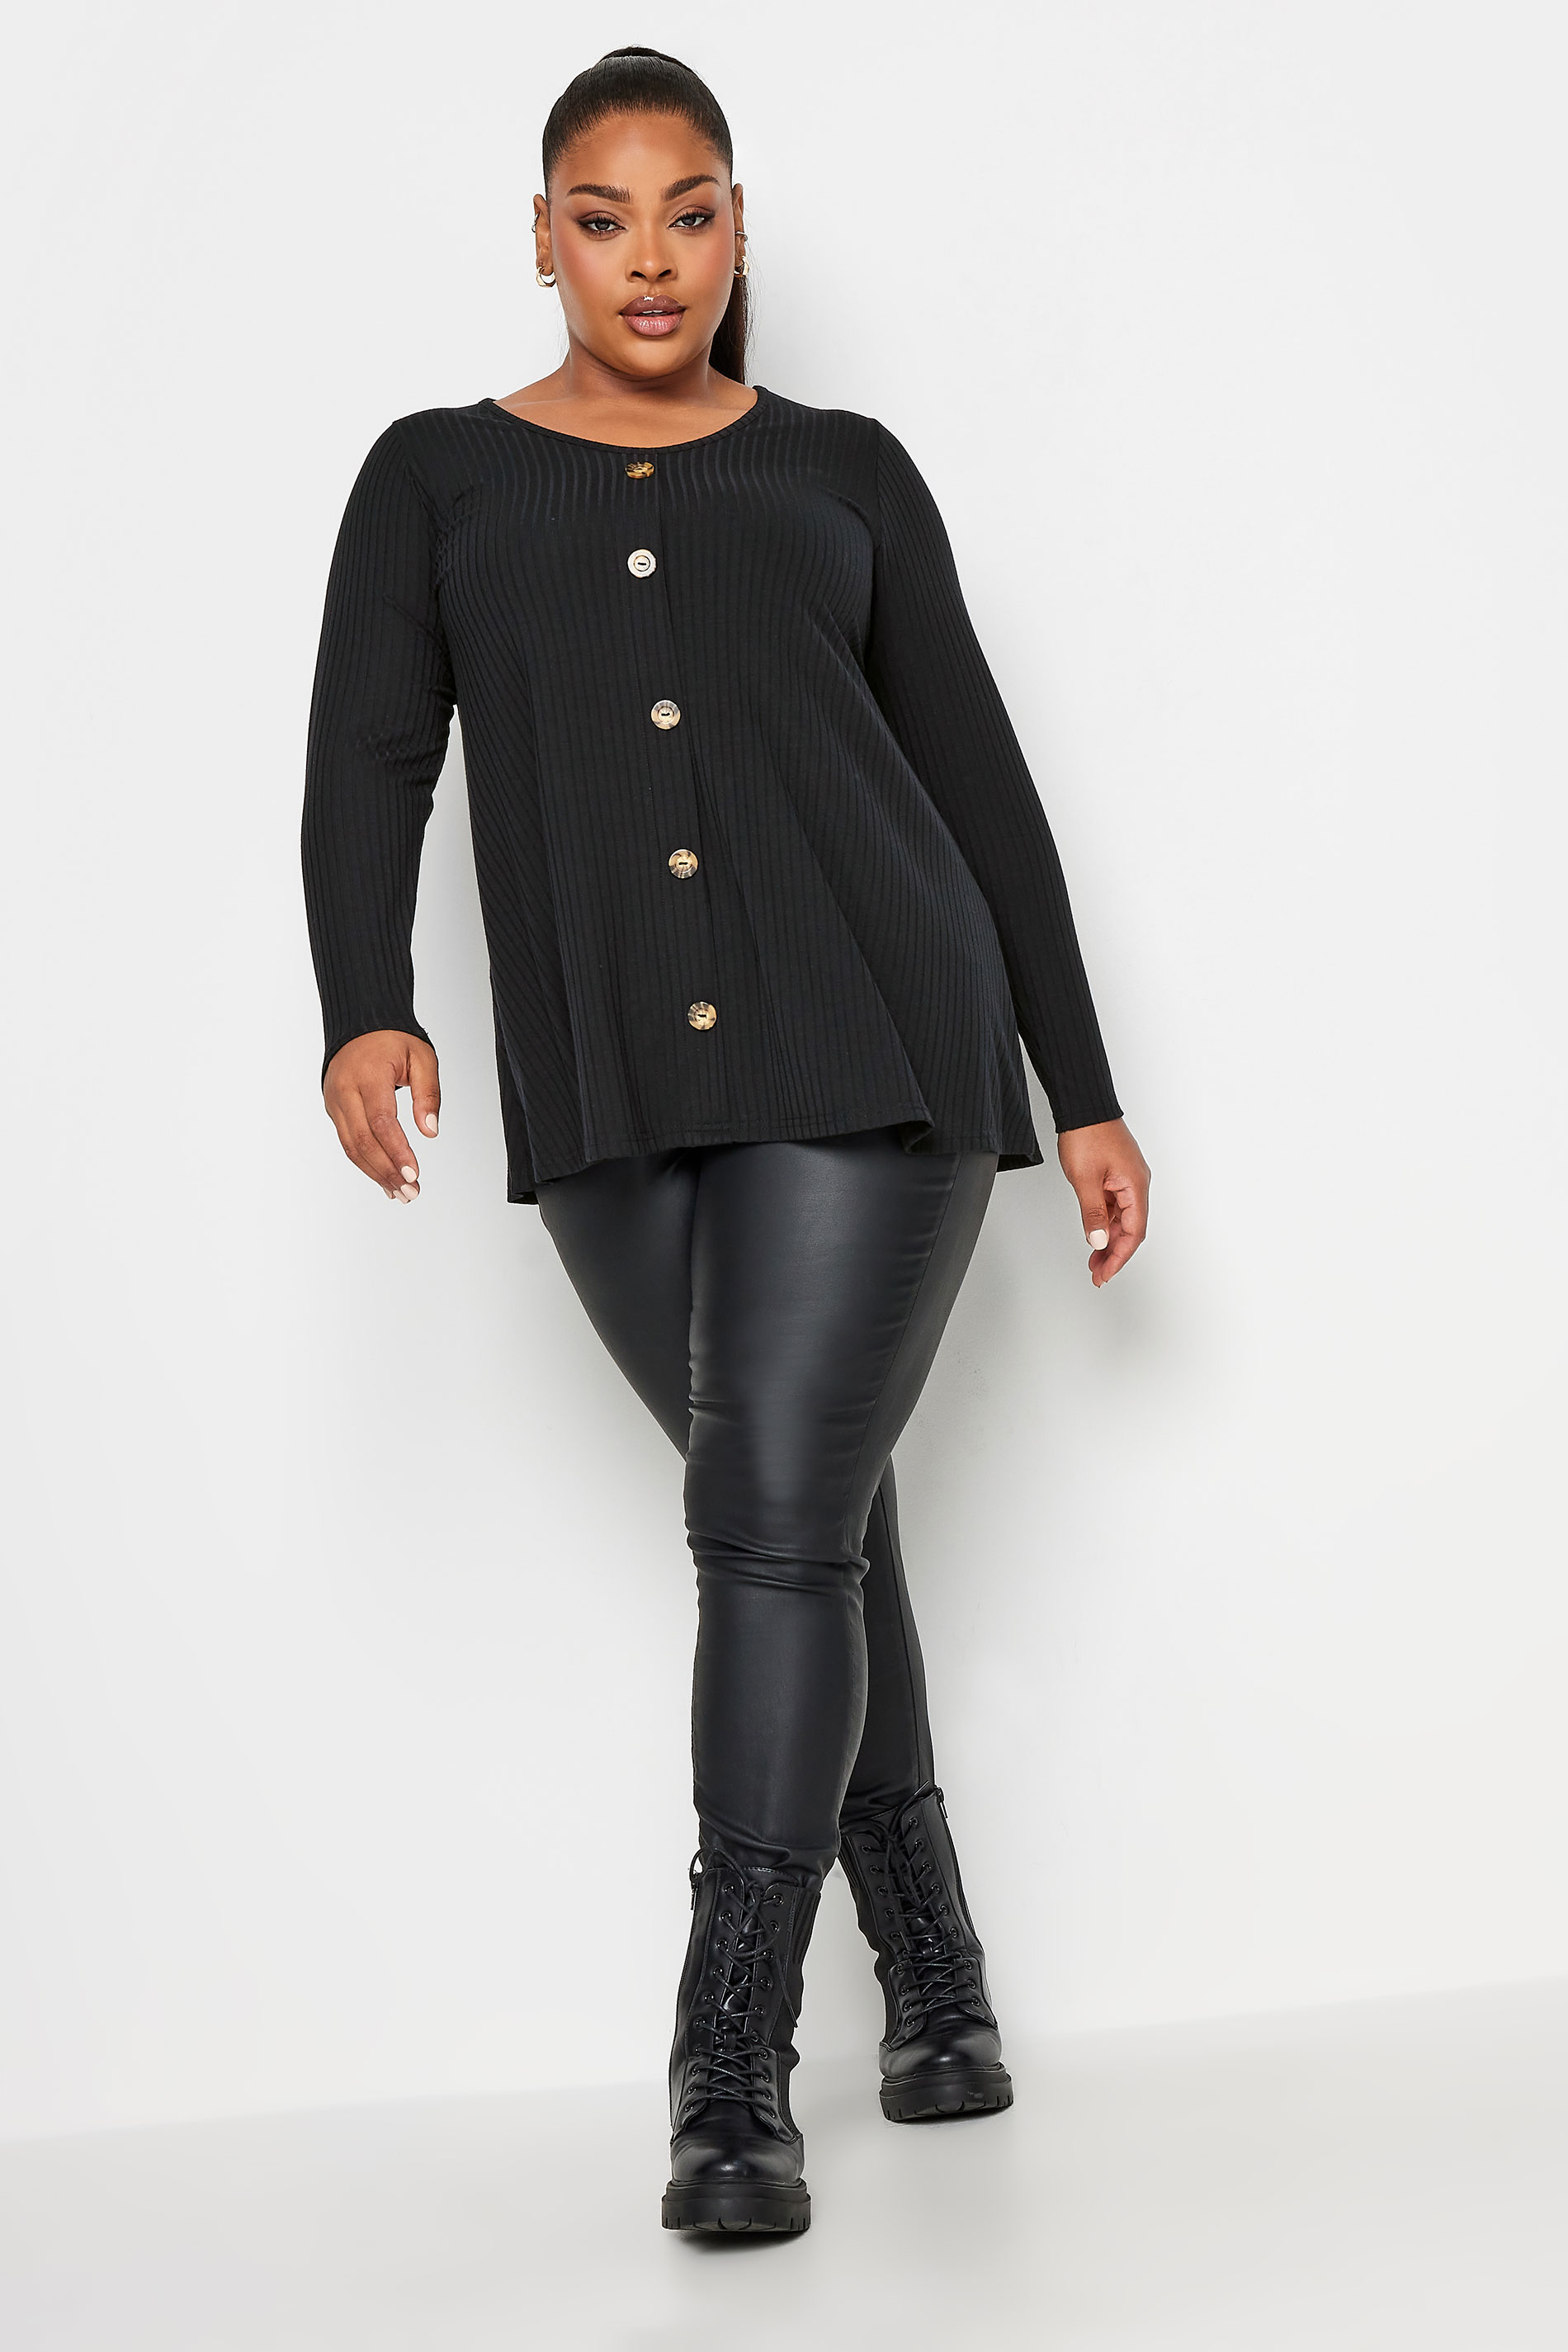 LIMITED COLLECTION Plus Size Black Ribbed Button Detail Long Sleeve Top | Yours Clothing 2